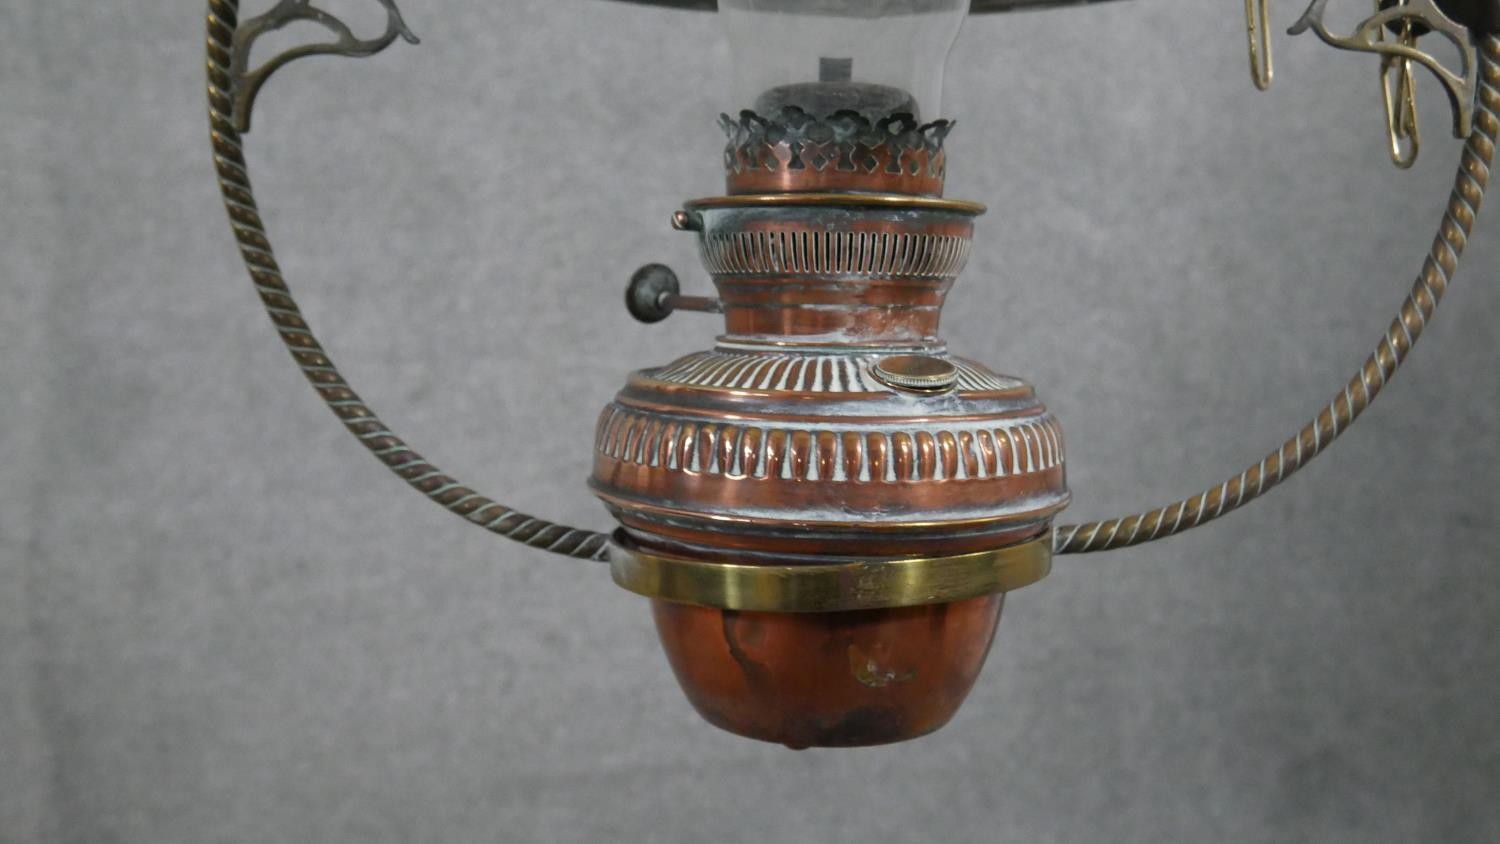 A 19th century hanging oil lamp with milk glass shade and a similar example with copper reservoir. - Image 4 of 17